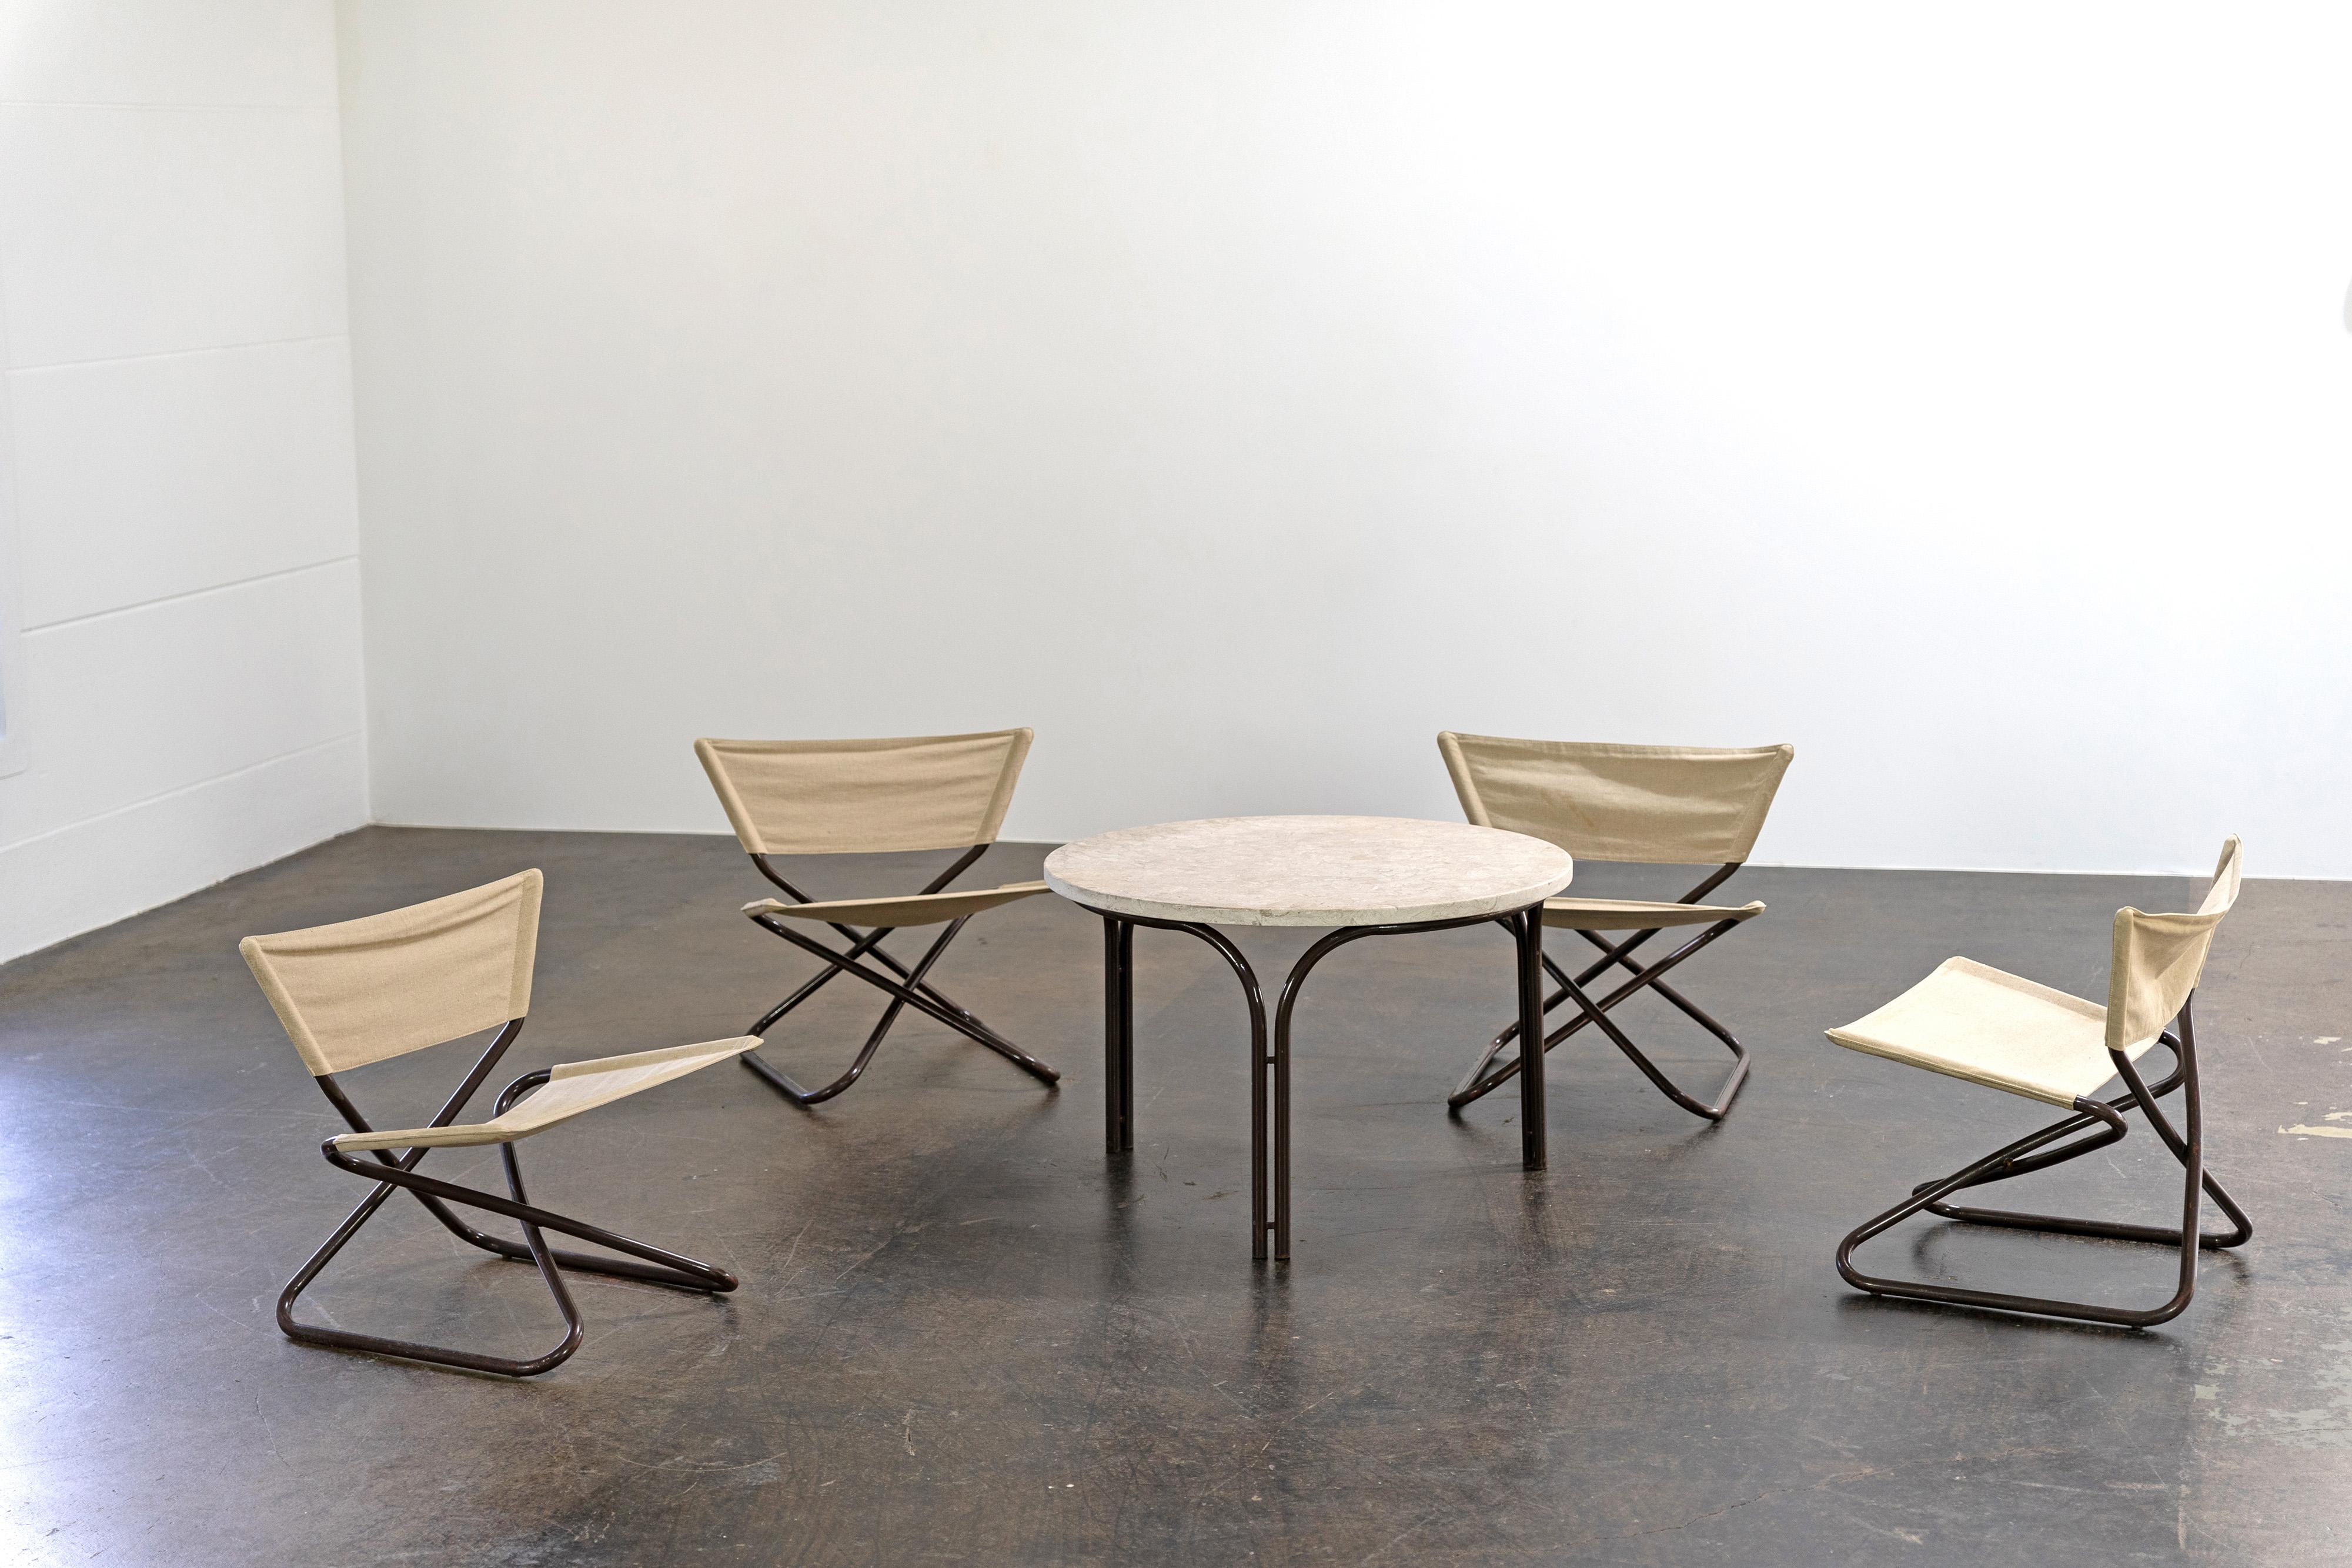 Rare set of four folding lounge chairs by Erik Magnussen, made of brown lacquered tubular steel with linen covers, and a table with a travertine table top. 